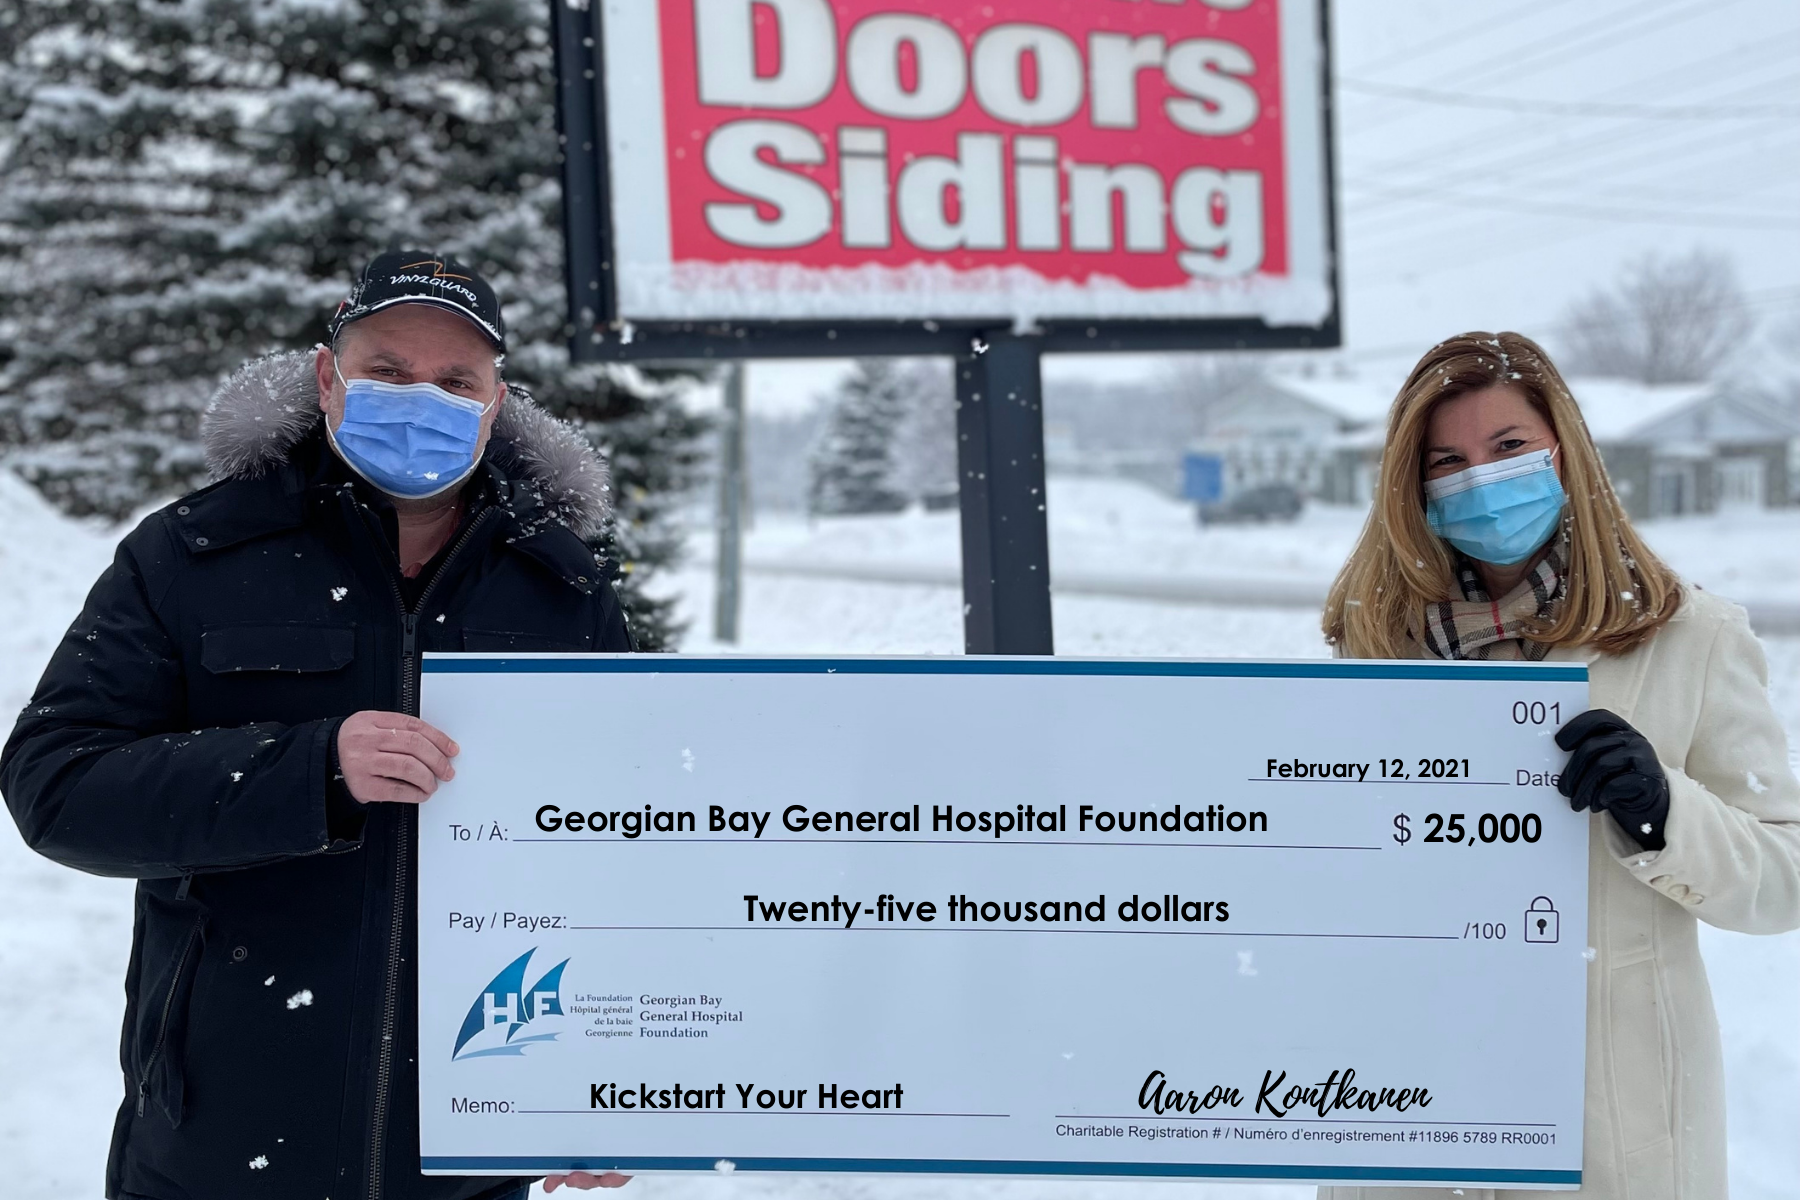 Amand and a women hold a giant cheque for $25,000 for the GBGH Kickstart Your Heart from Balm Beach House of Glass